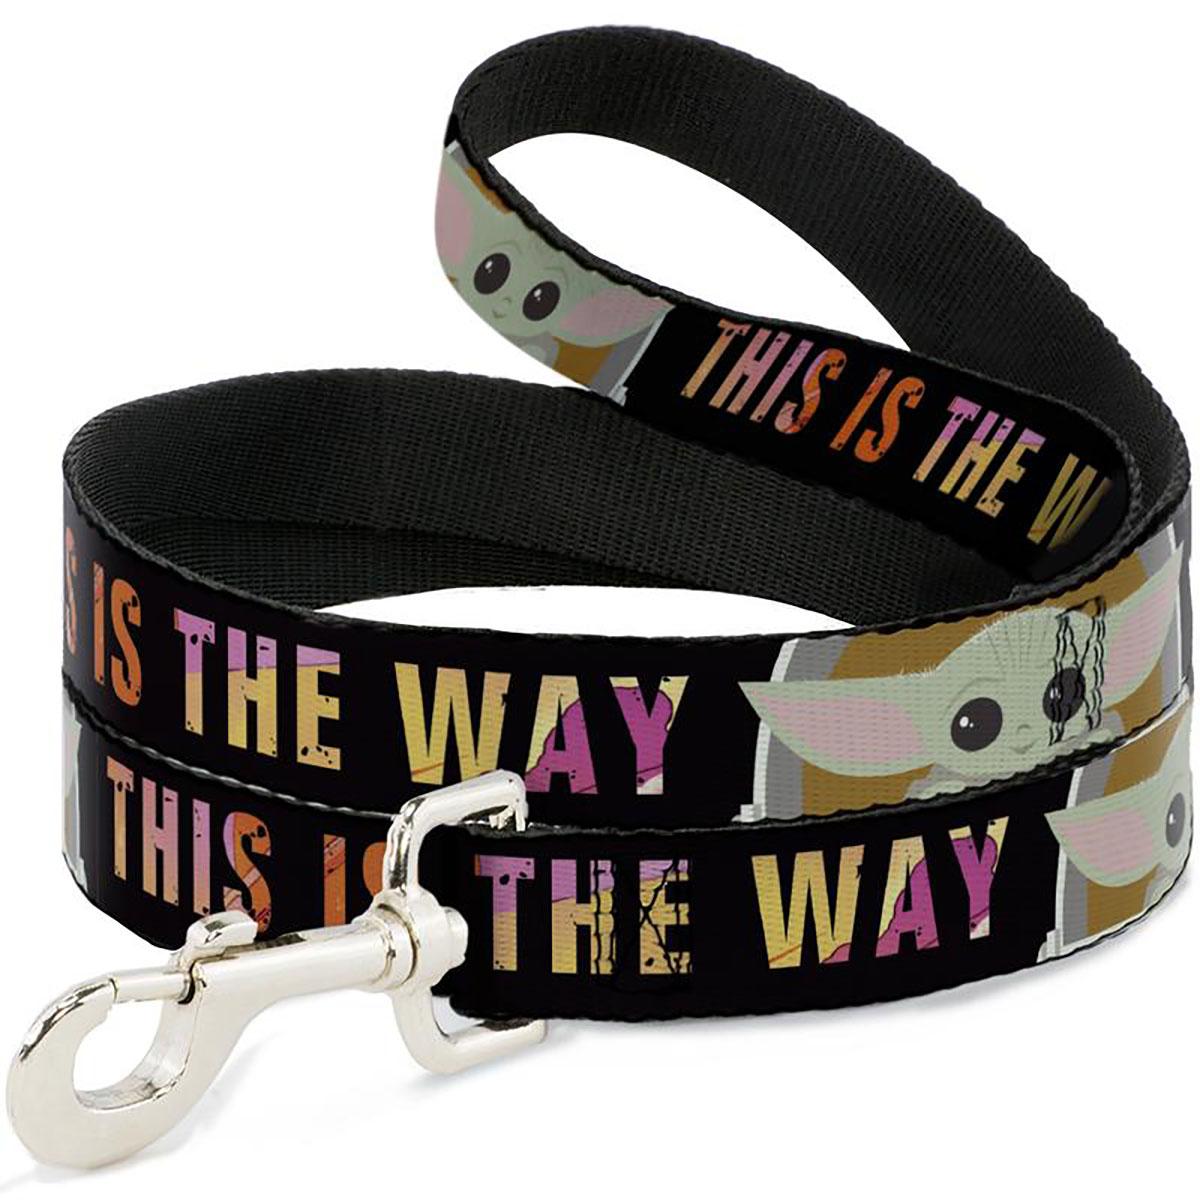 Star Wars The Child This Is The Way Dog Leash by Buckle-Down - Black